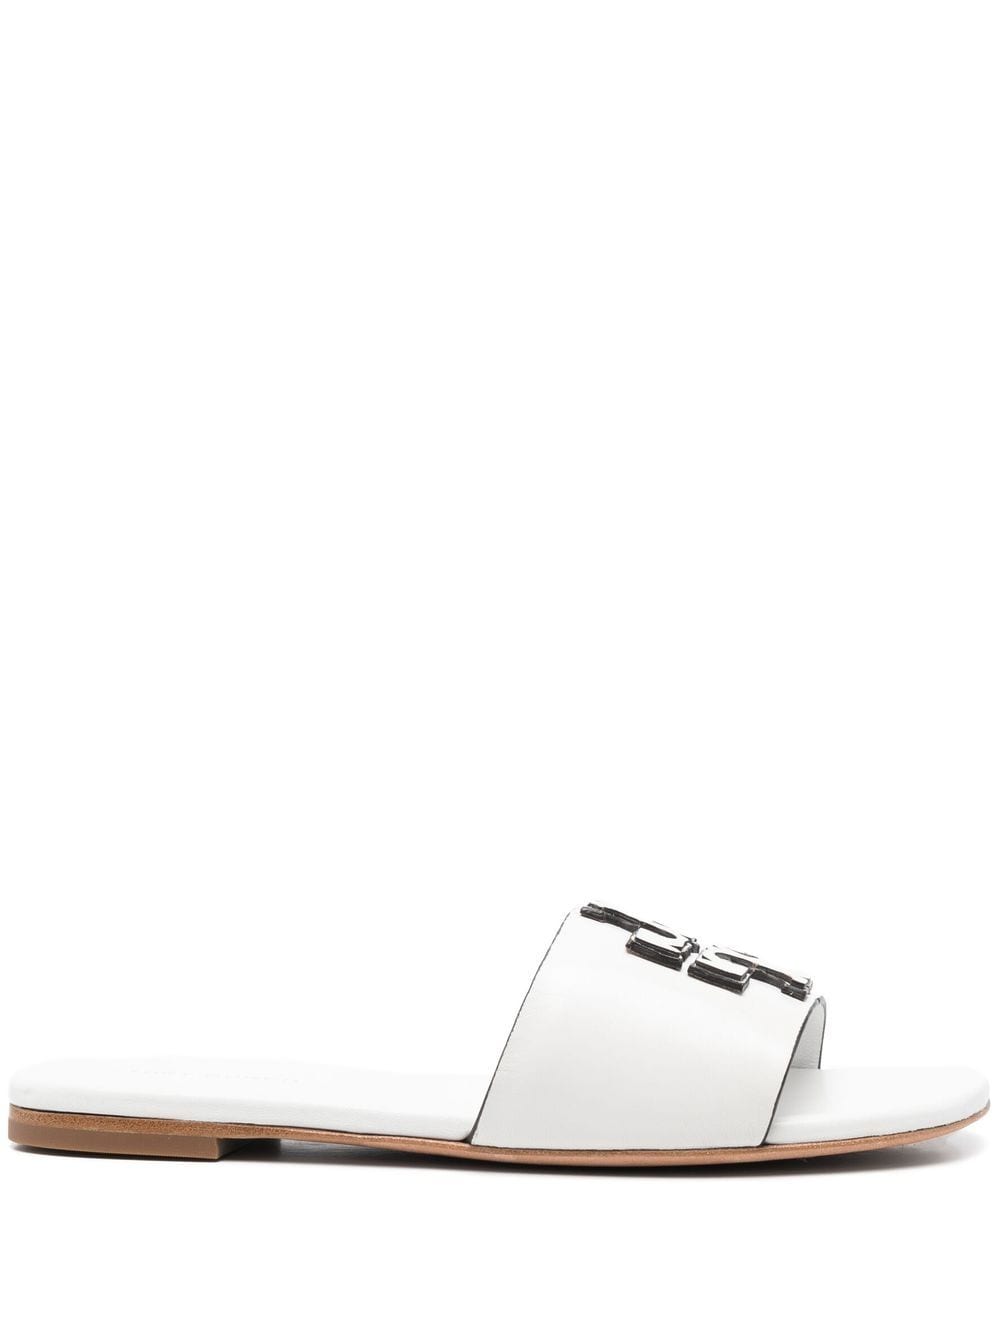 Tory Burch embossed-logo leather slides - White von Tory Burch